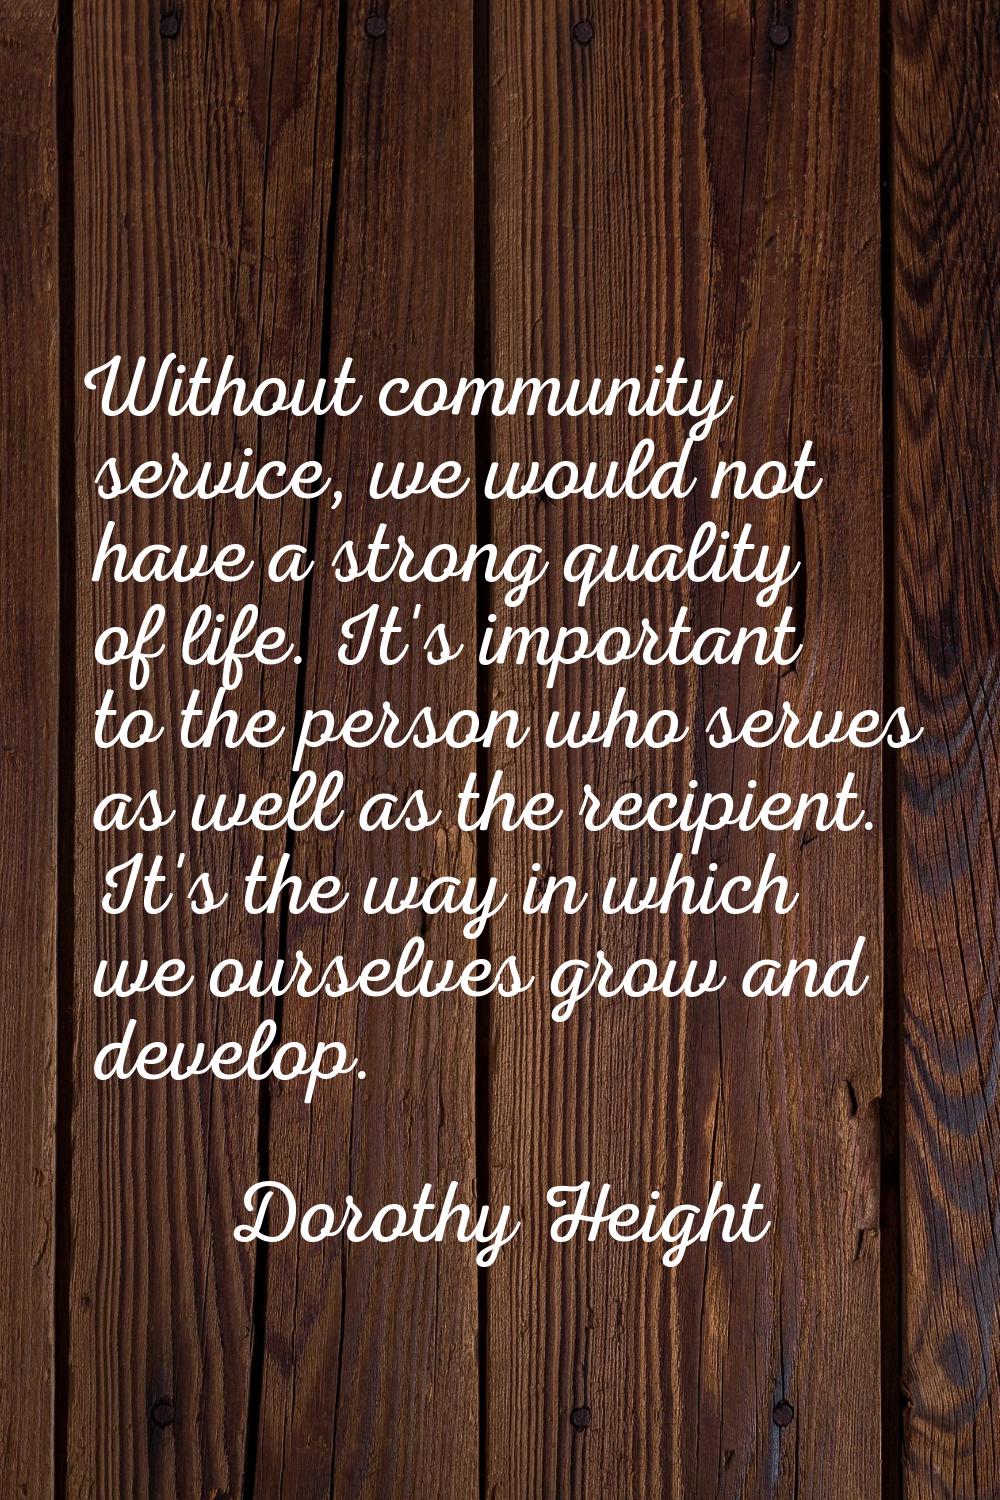 Without community service, we would not have a strong quality of life. It's important to the person